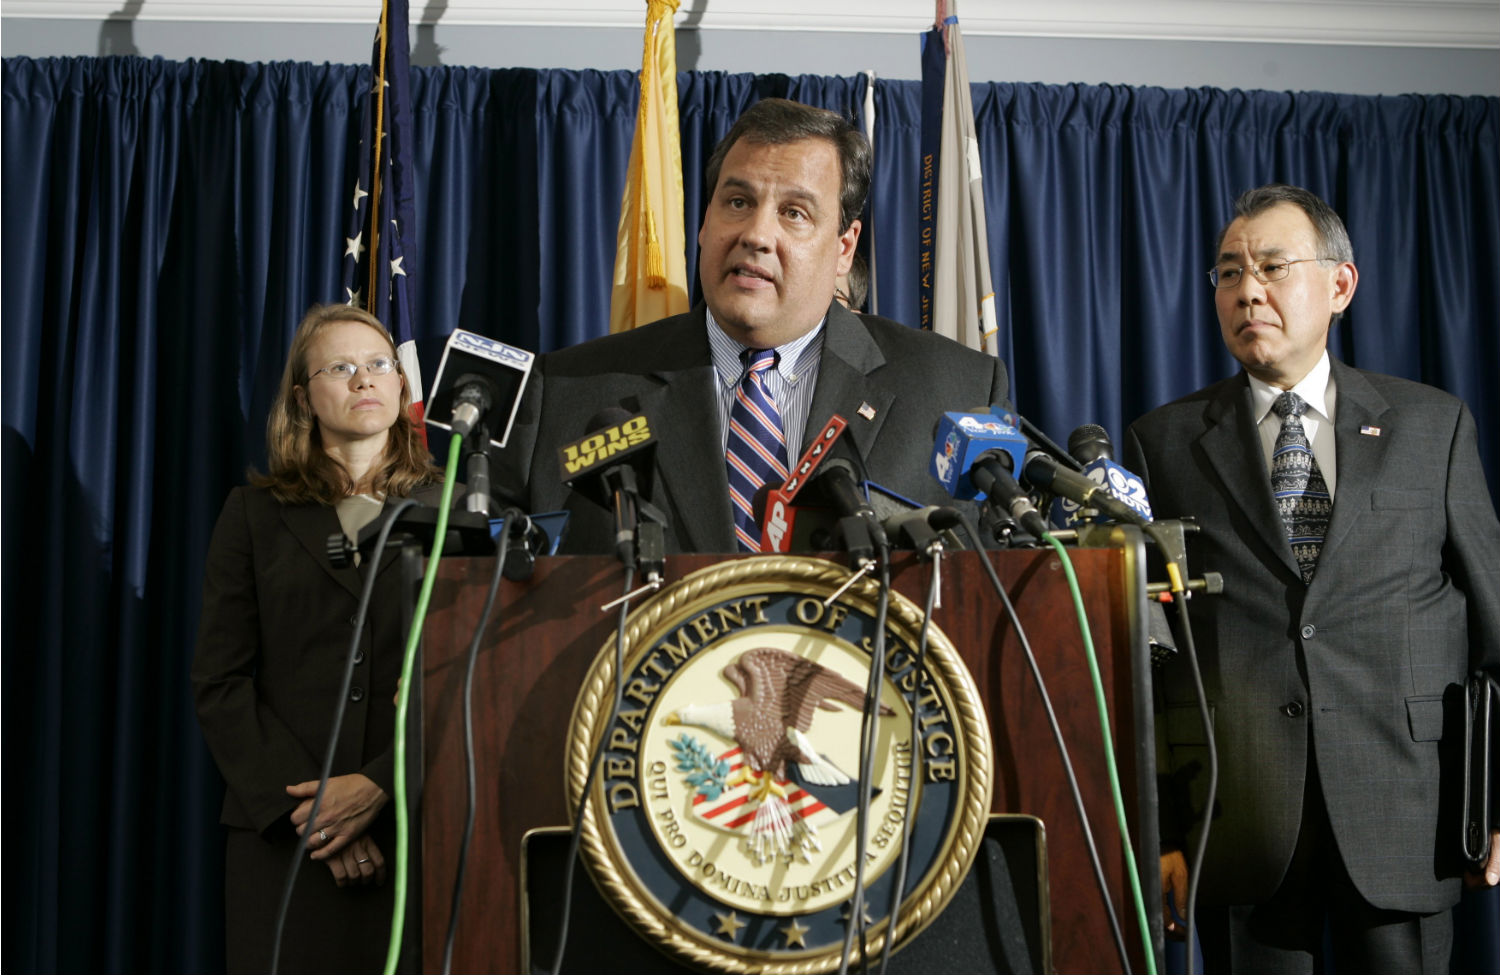 A New Book Says Chris Christie Misused His Power as US Attorney